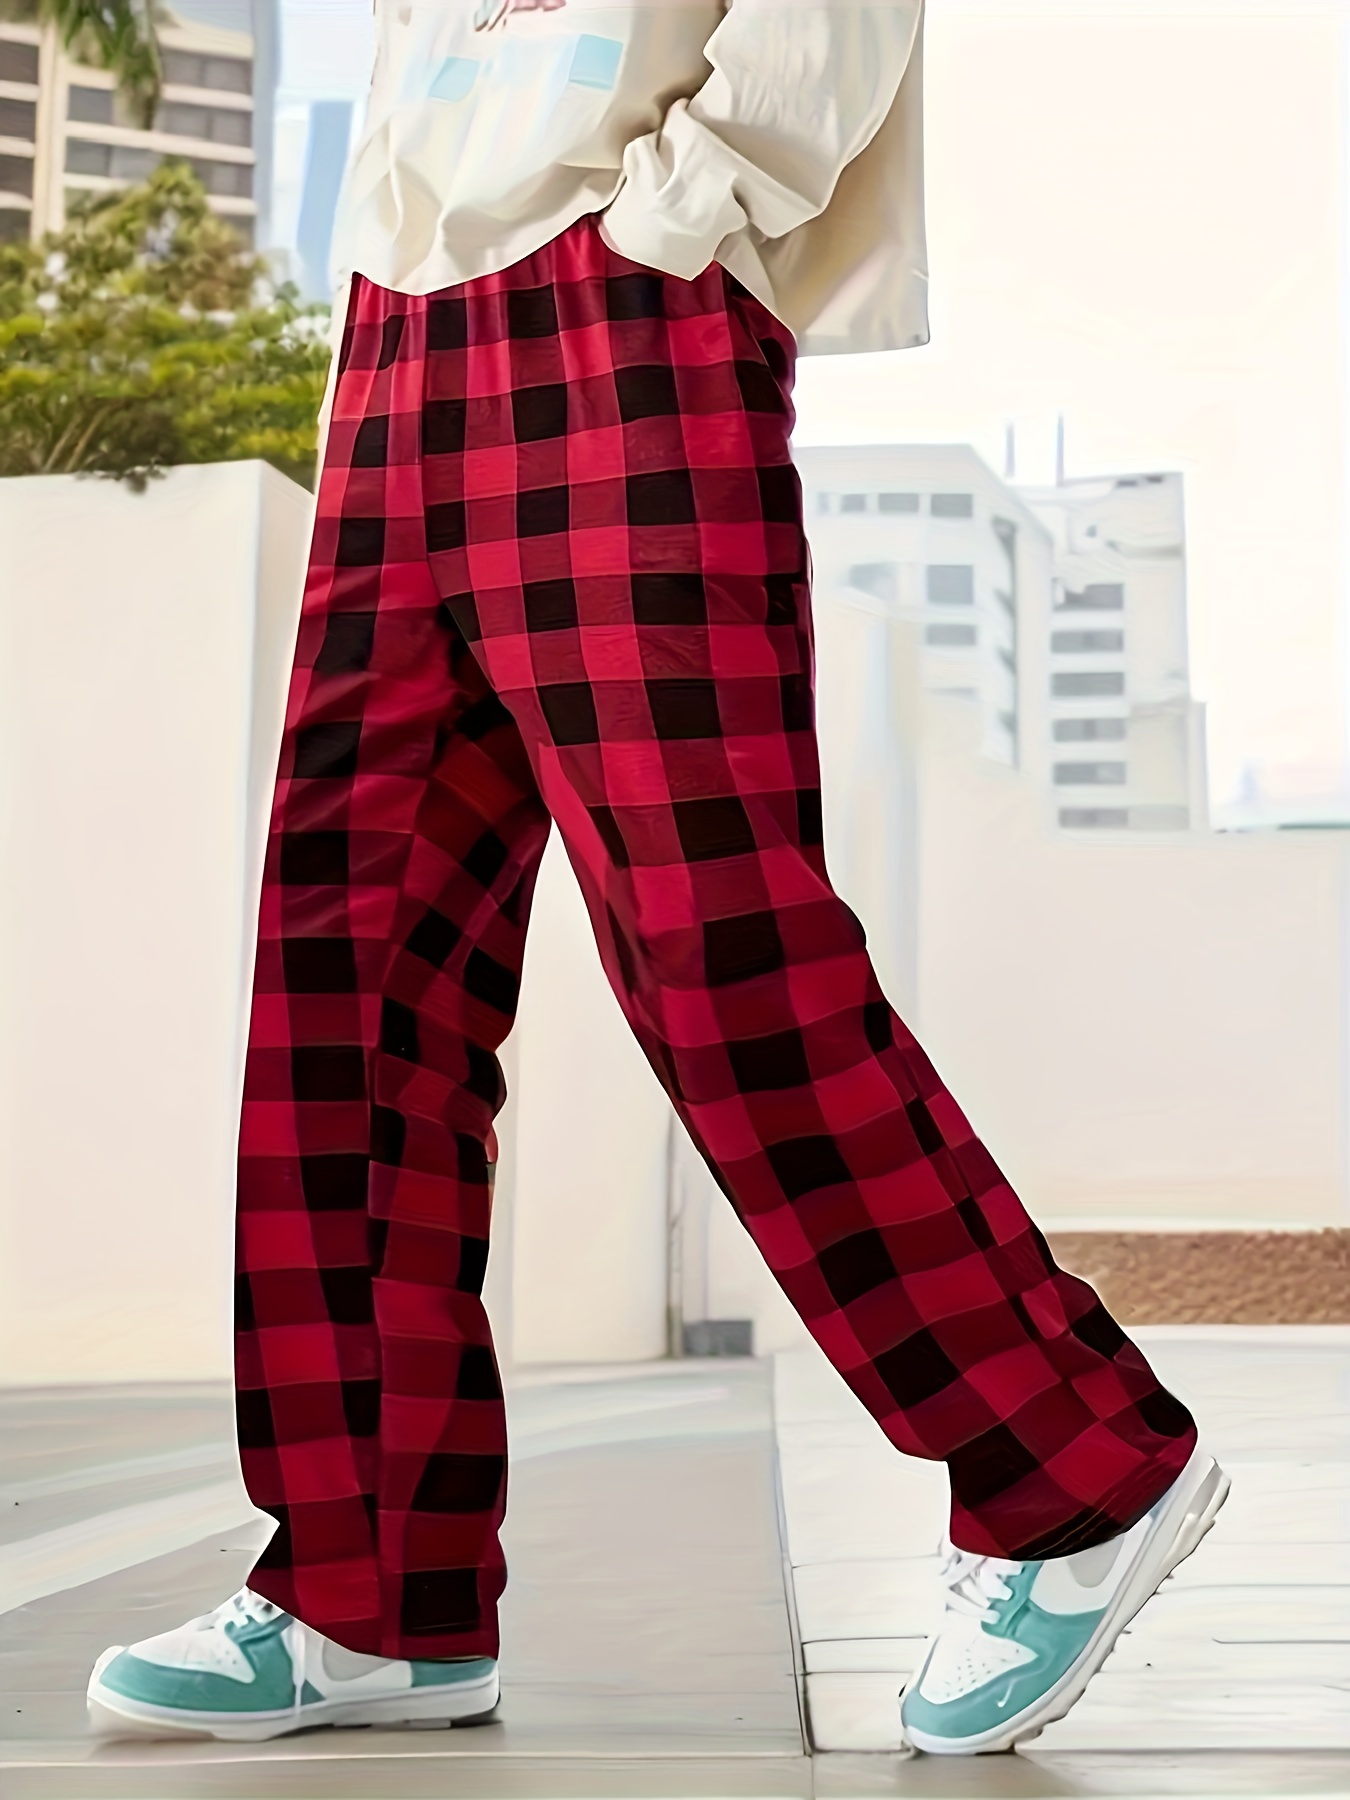 Men's Classic Plaid Casual Comfy Pants, Trendy Letter And Graphic Print  Loose Stretchy Home Pajamas Bottom With Pockets